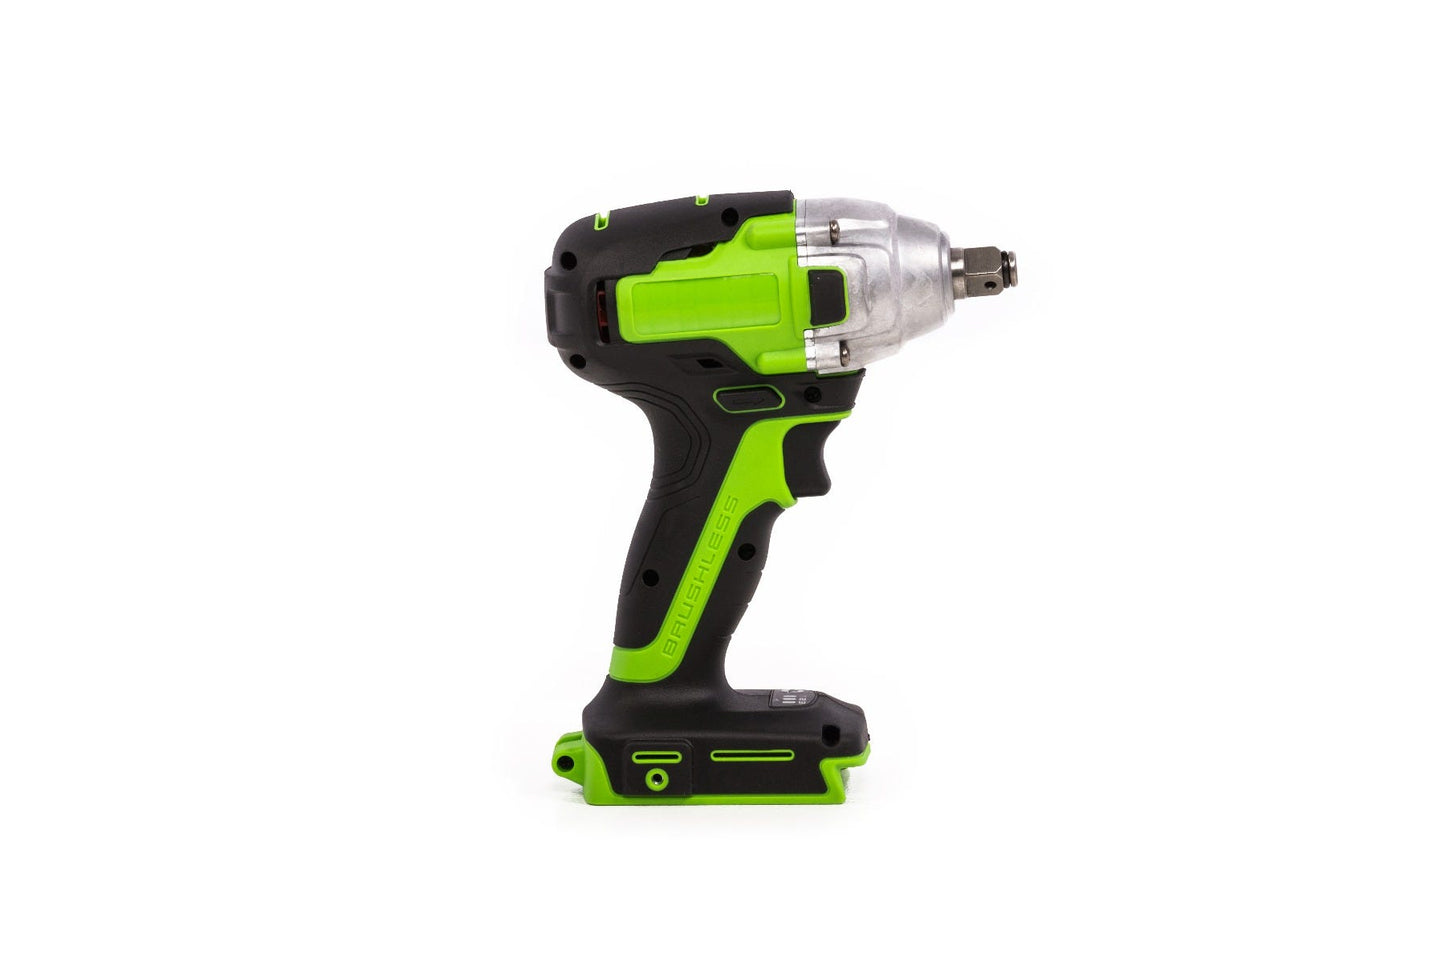 24IW1 48V/24V Dual-Volt 1/2" Impact Wrench (Tool Only)